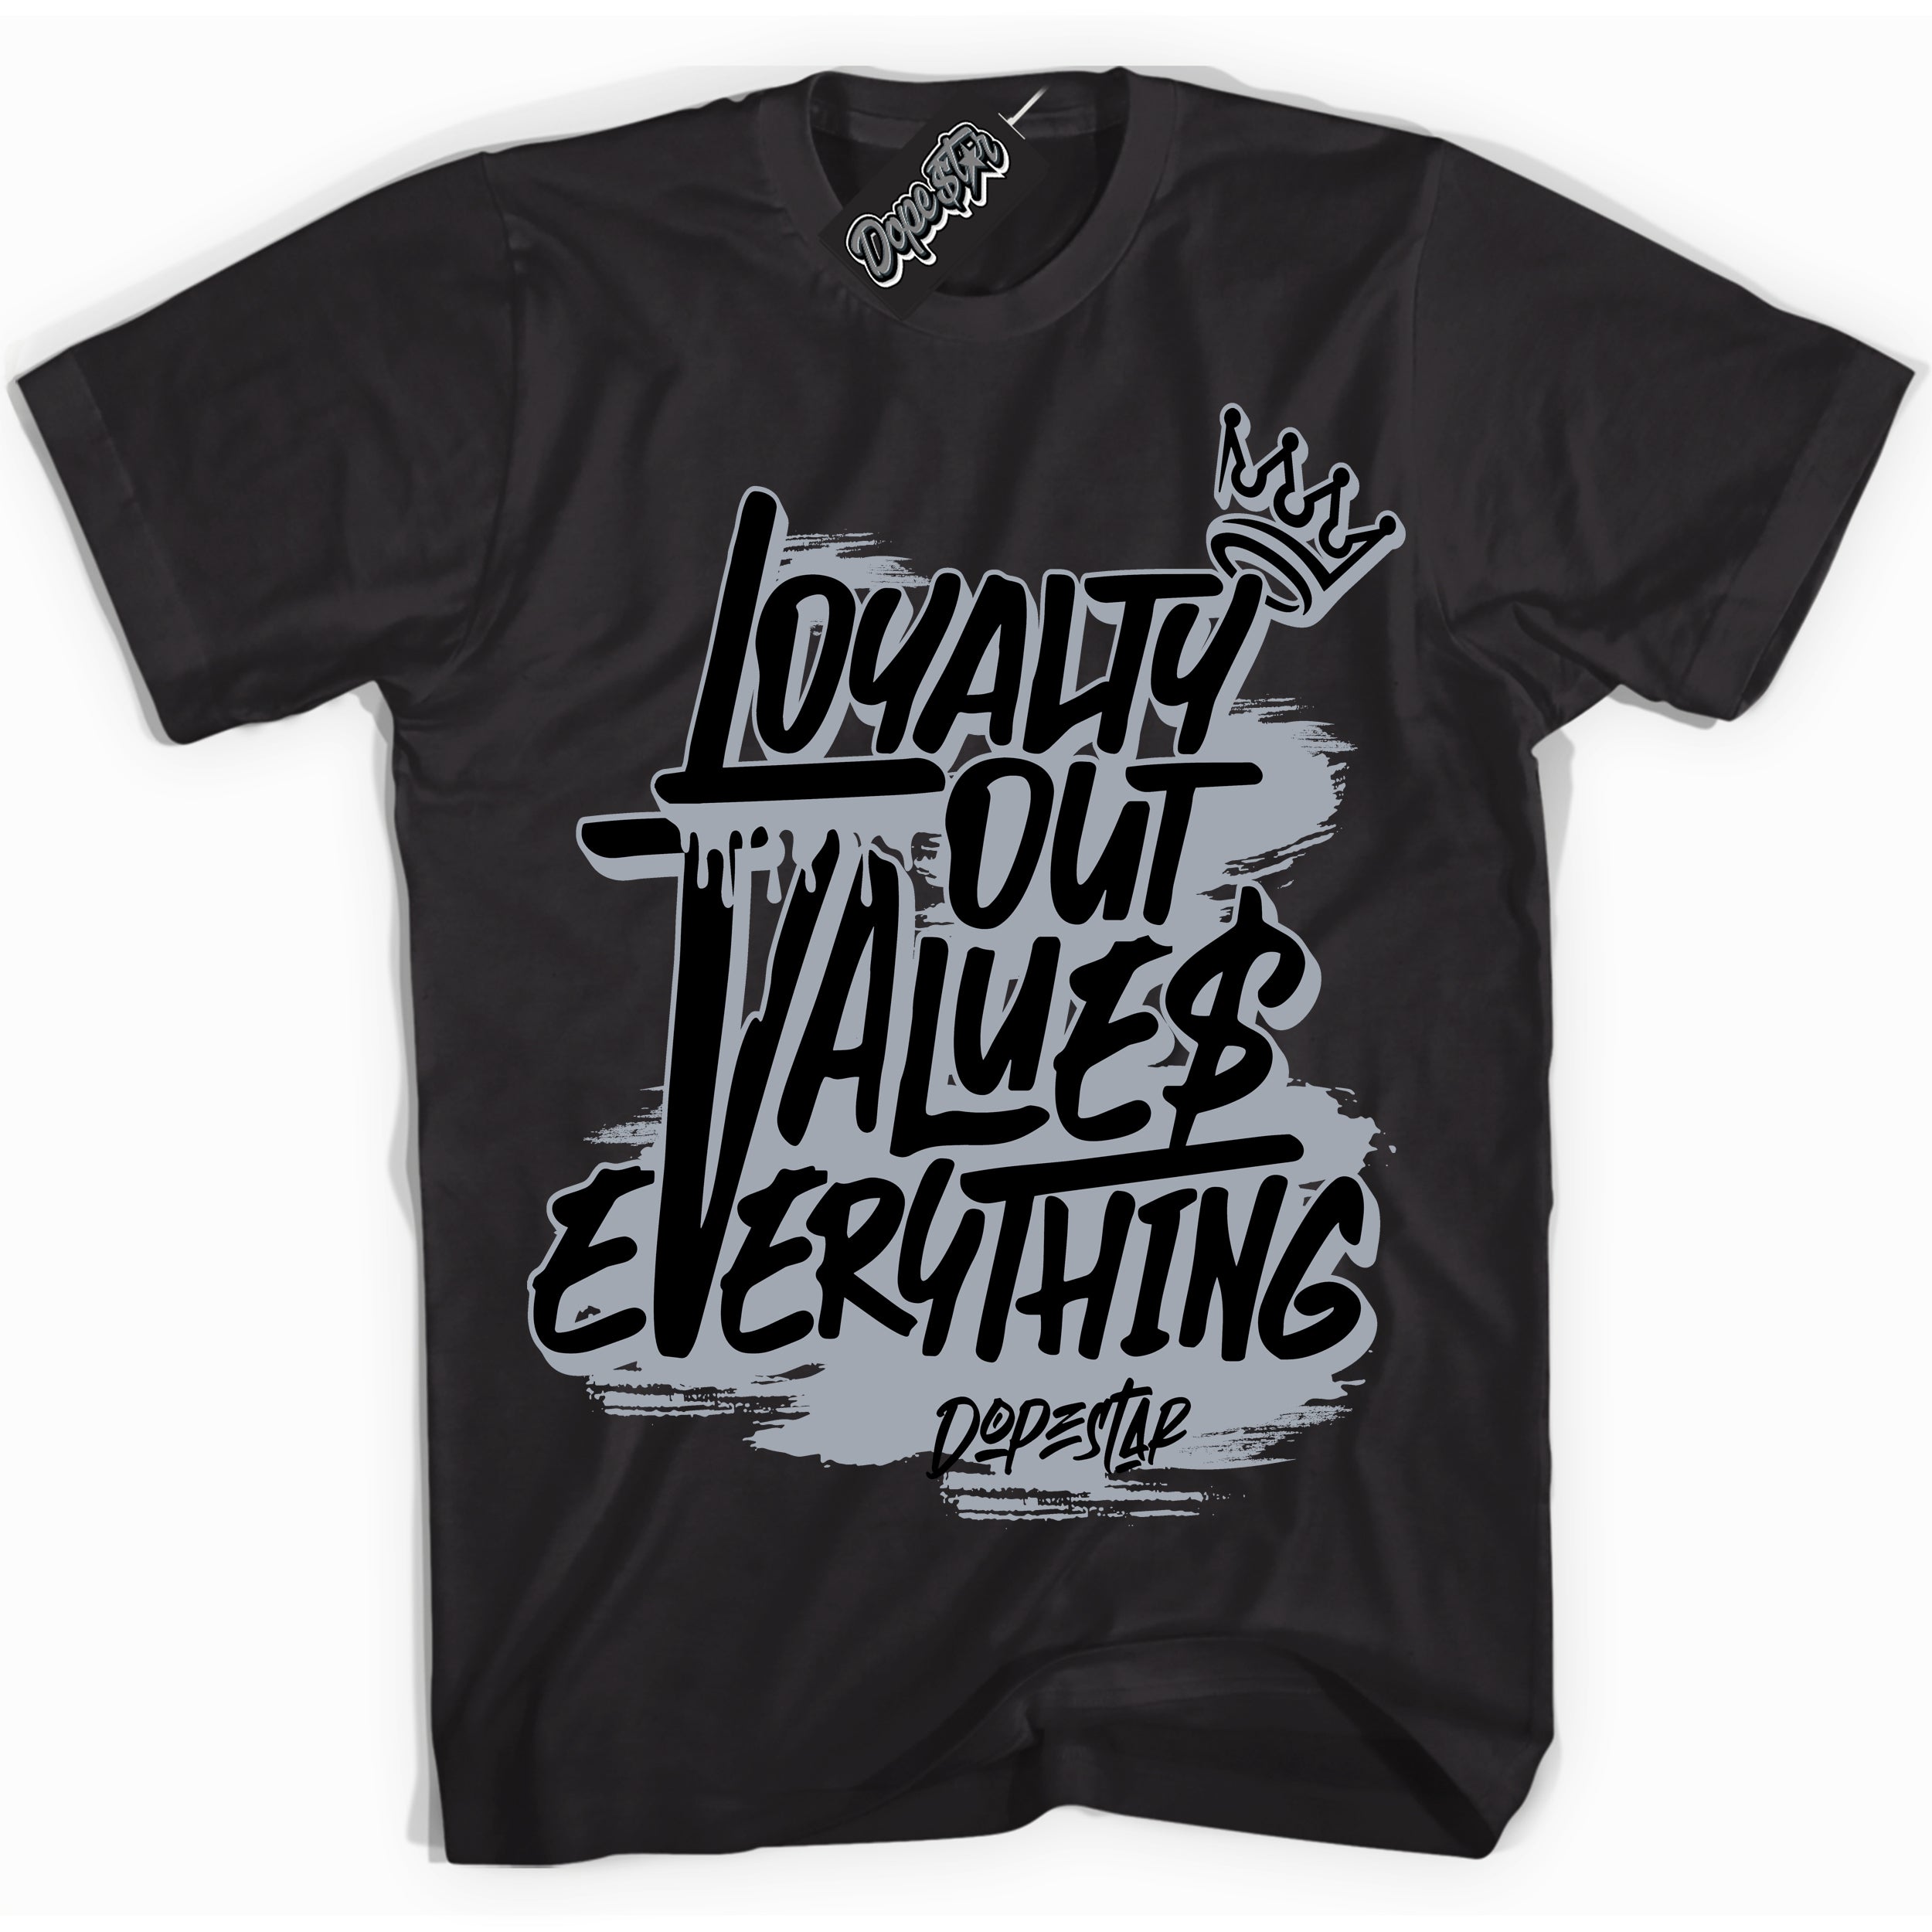 Cool Black Shirt with “ Loyalty Out Values Everything” design that perfectly matches The Kaws x Sky High Farm 1s Sneakers.